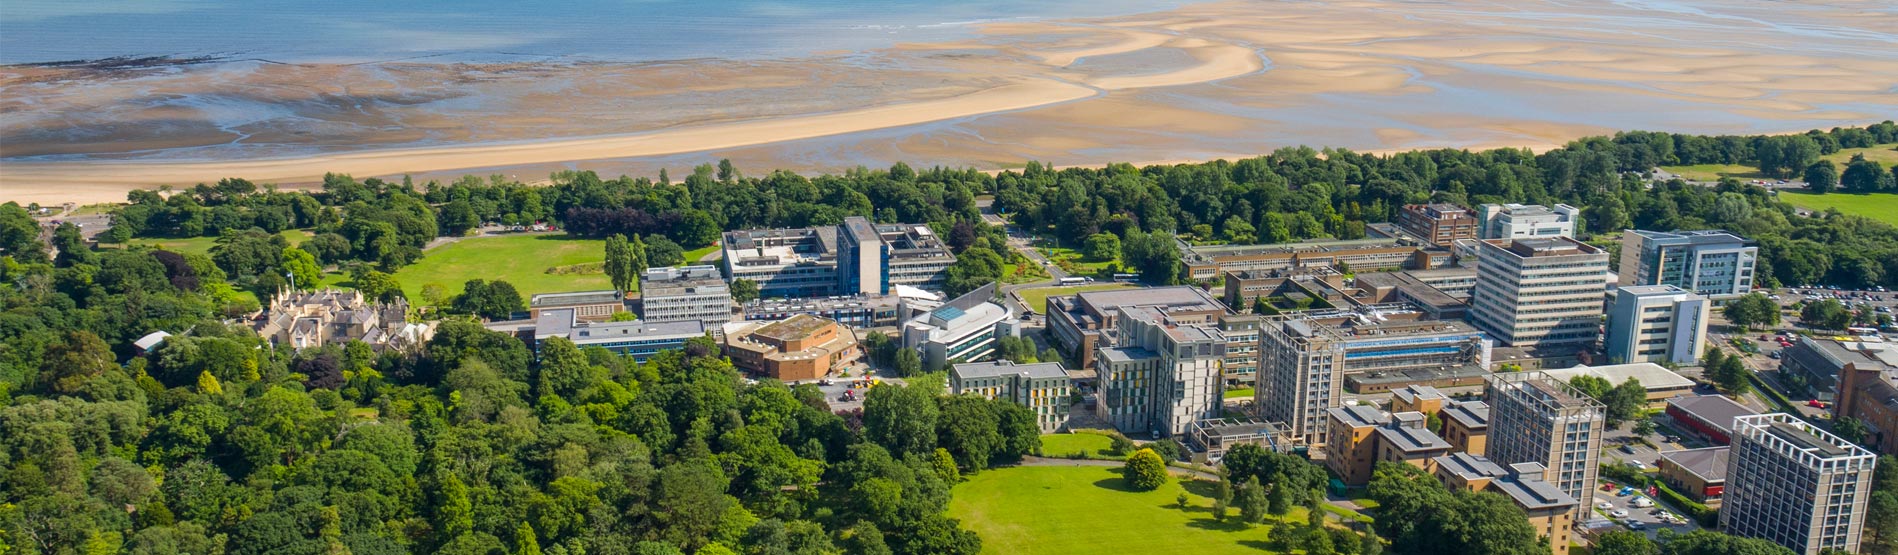 Singleton Park Campus from the air